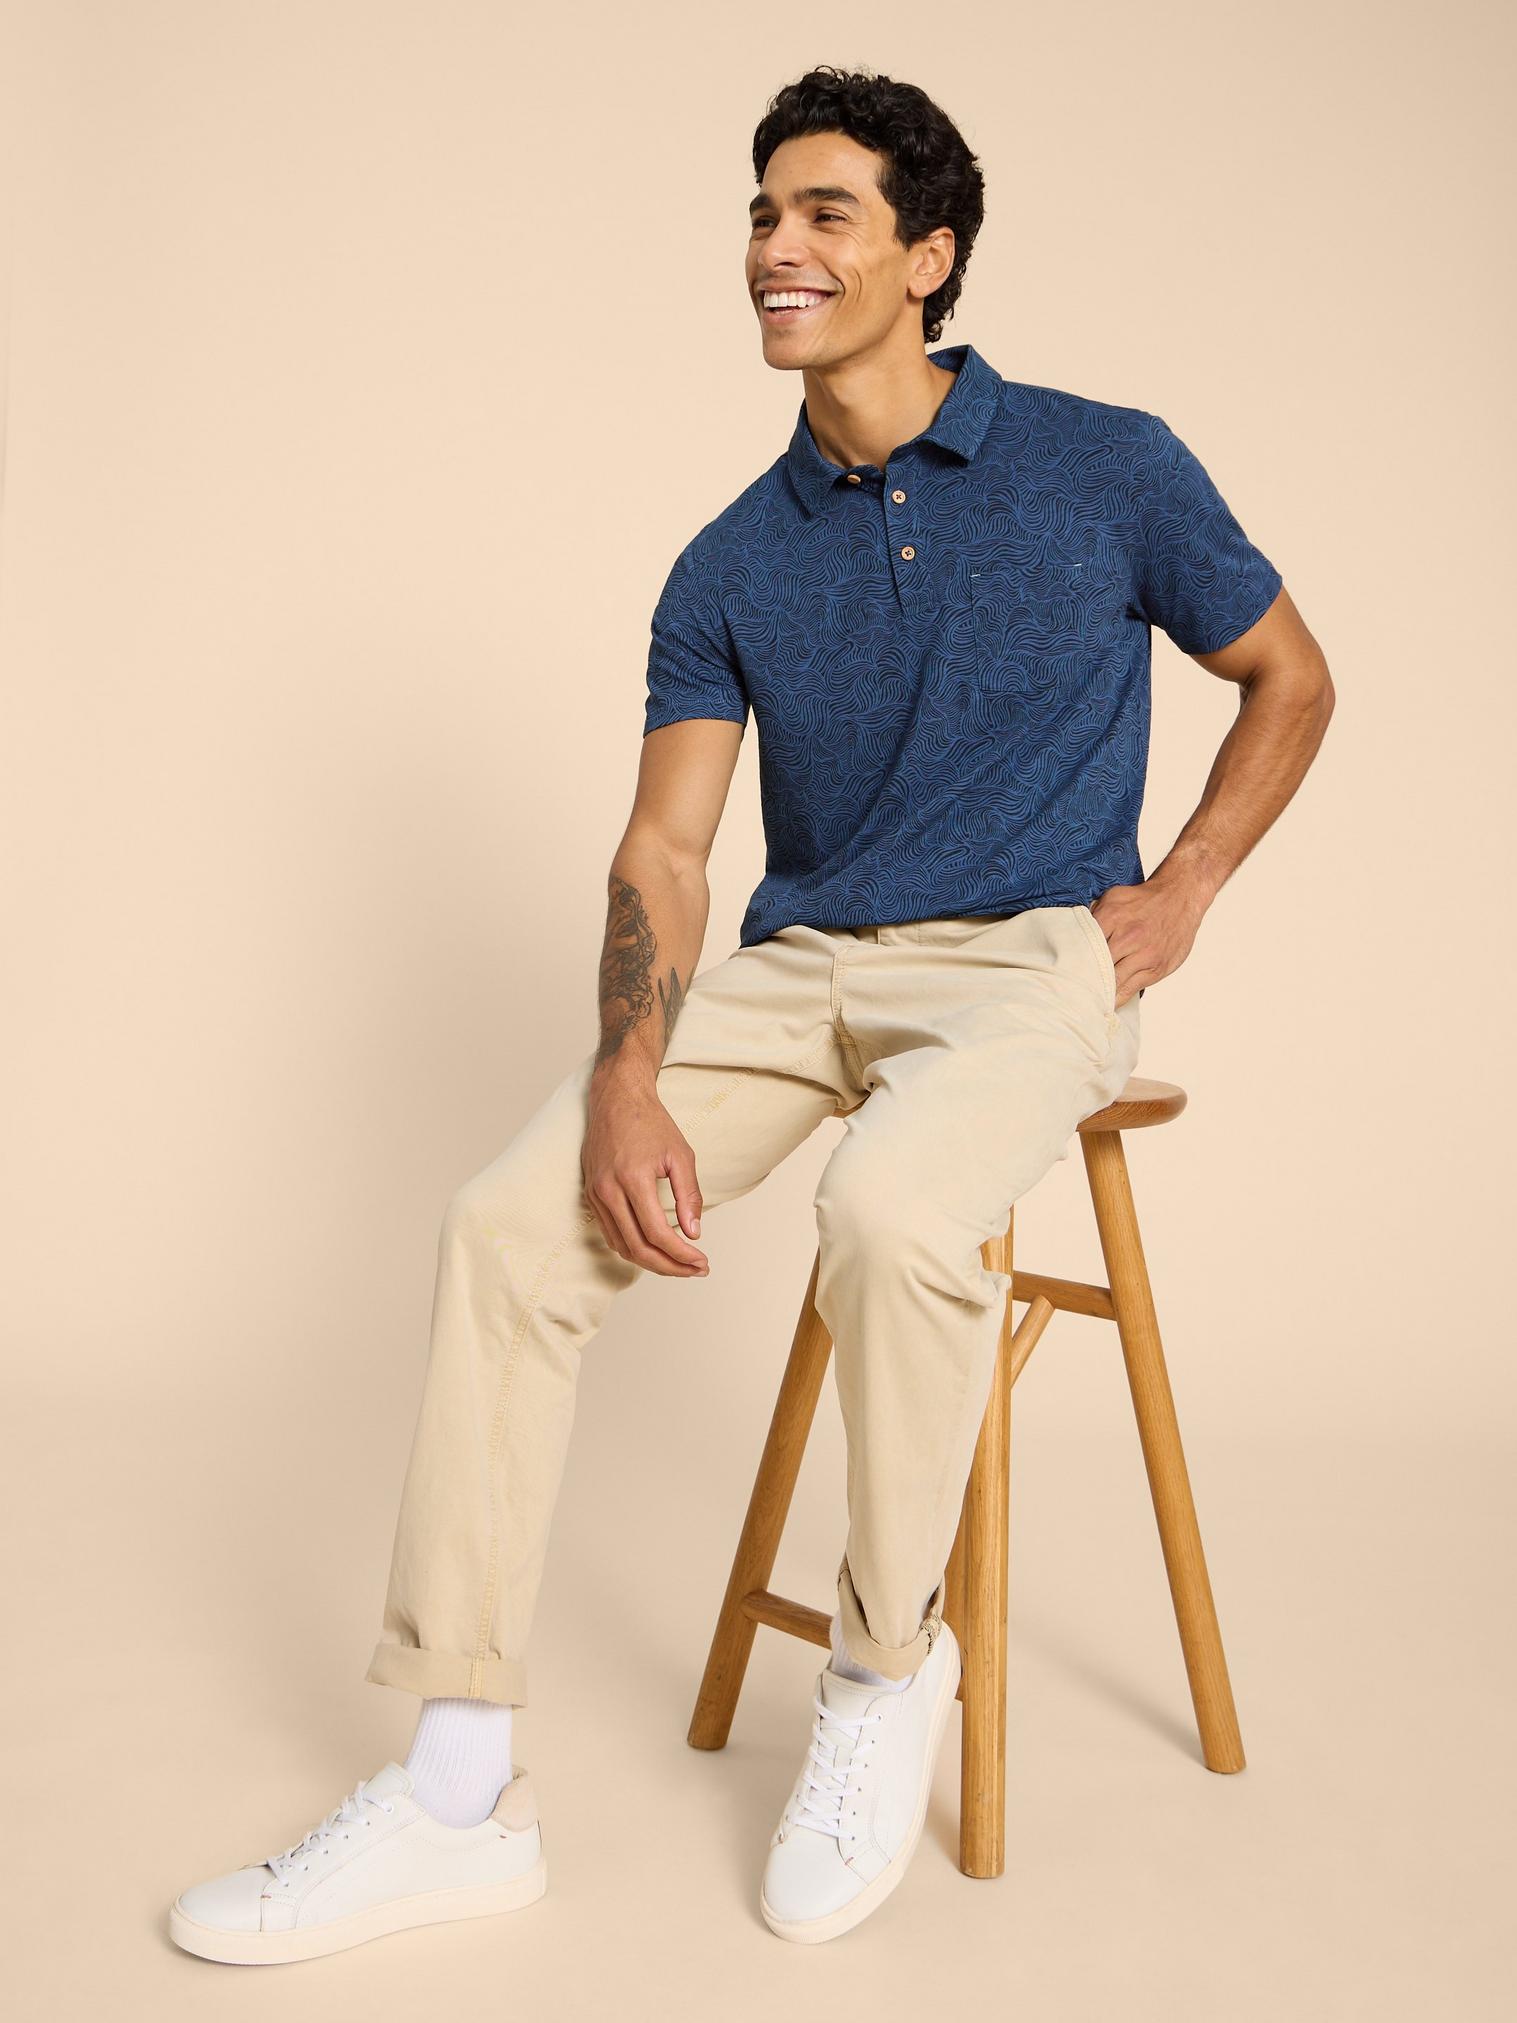 Waves Printed Polo in NAVY PR - LIFESTYLE